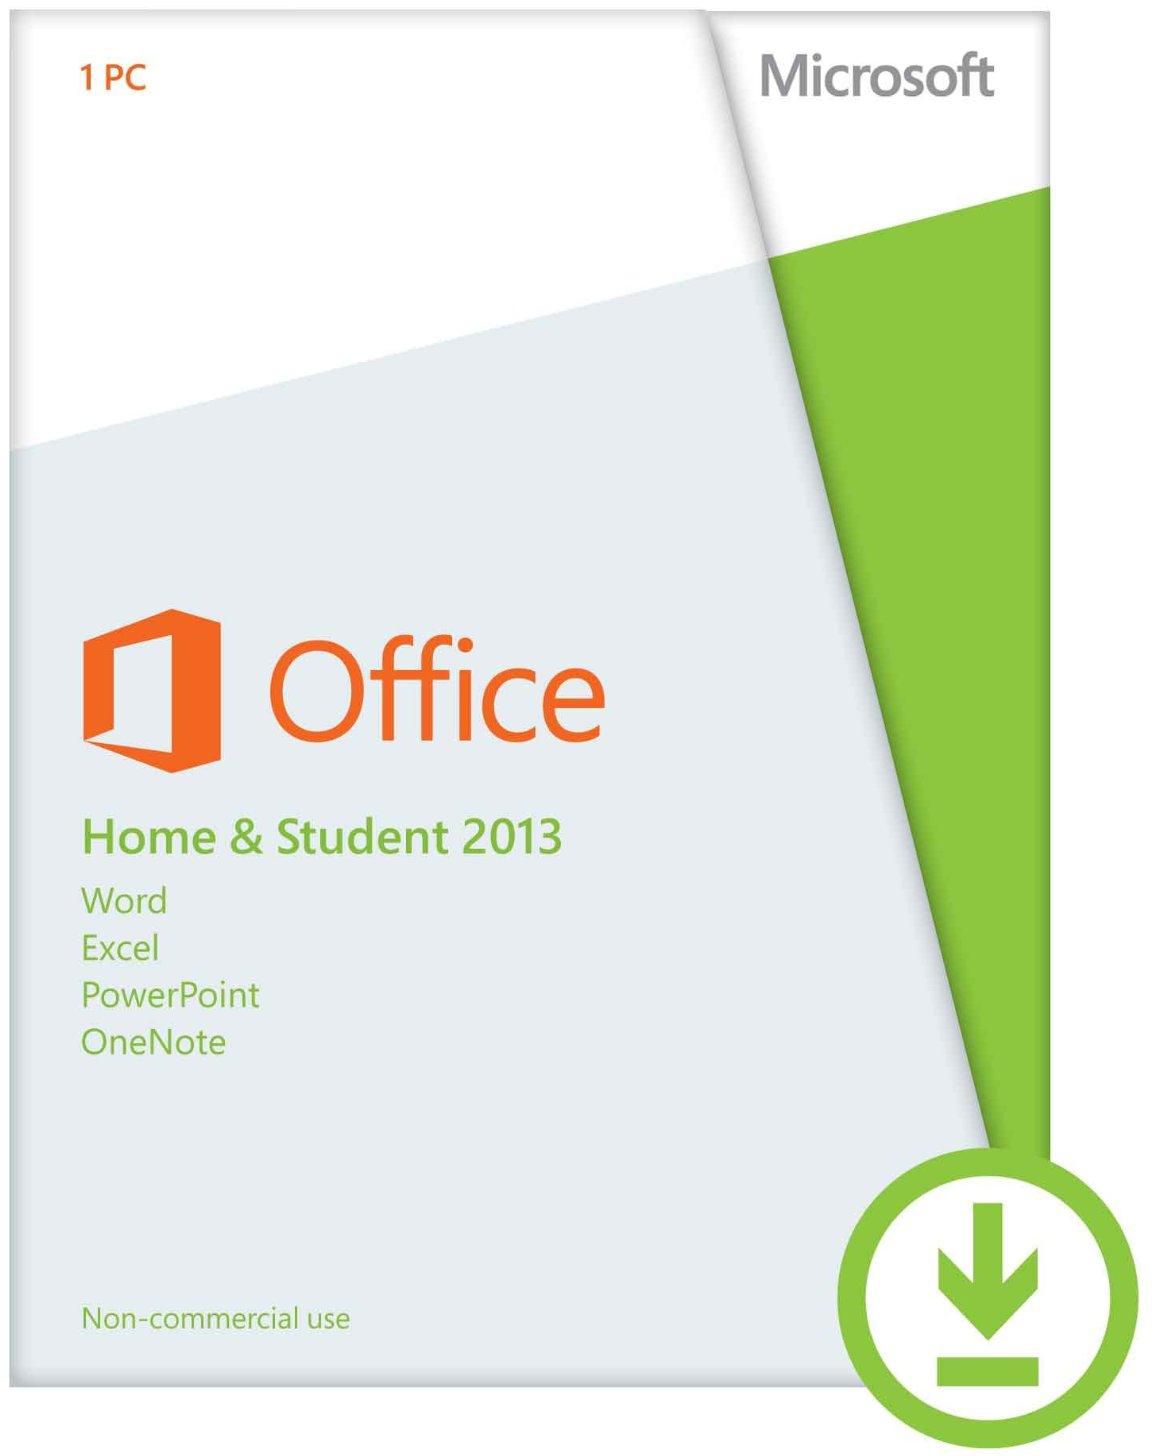 MS Office Home and Student 2013 price